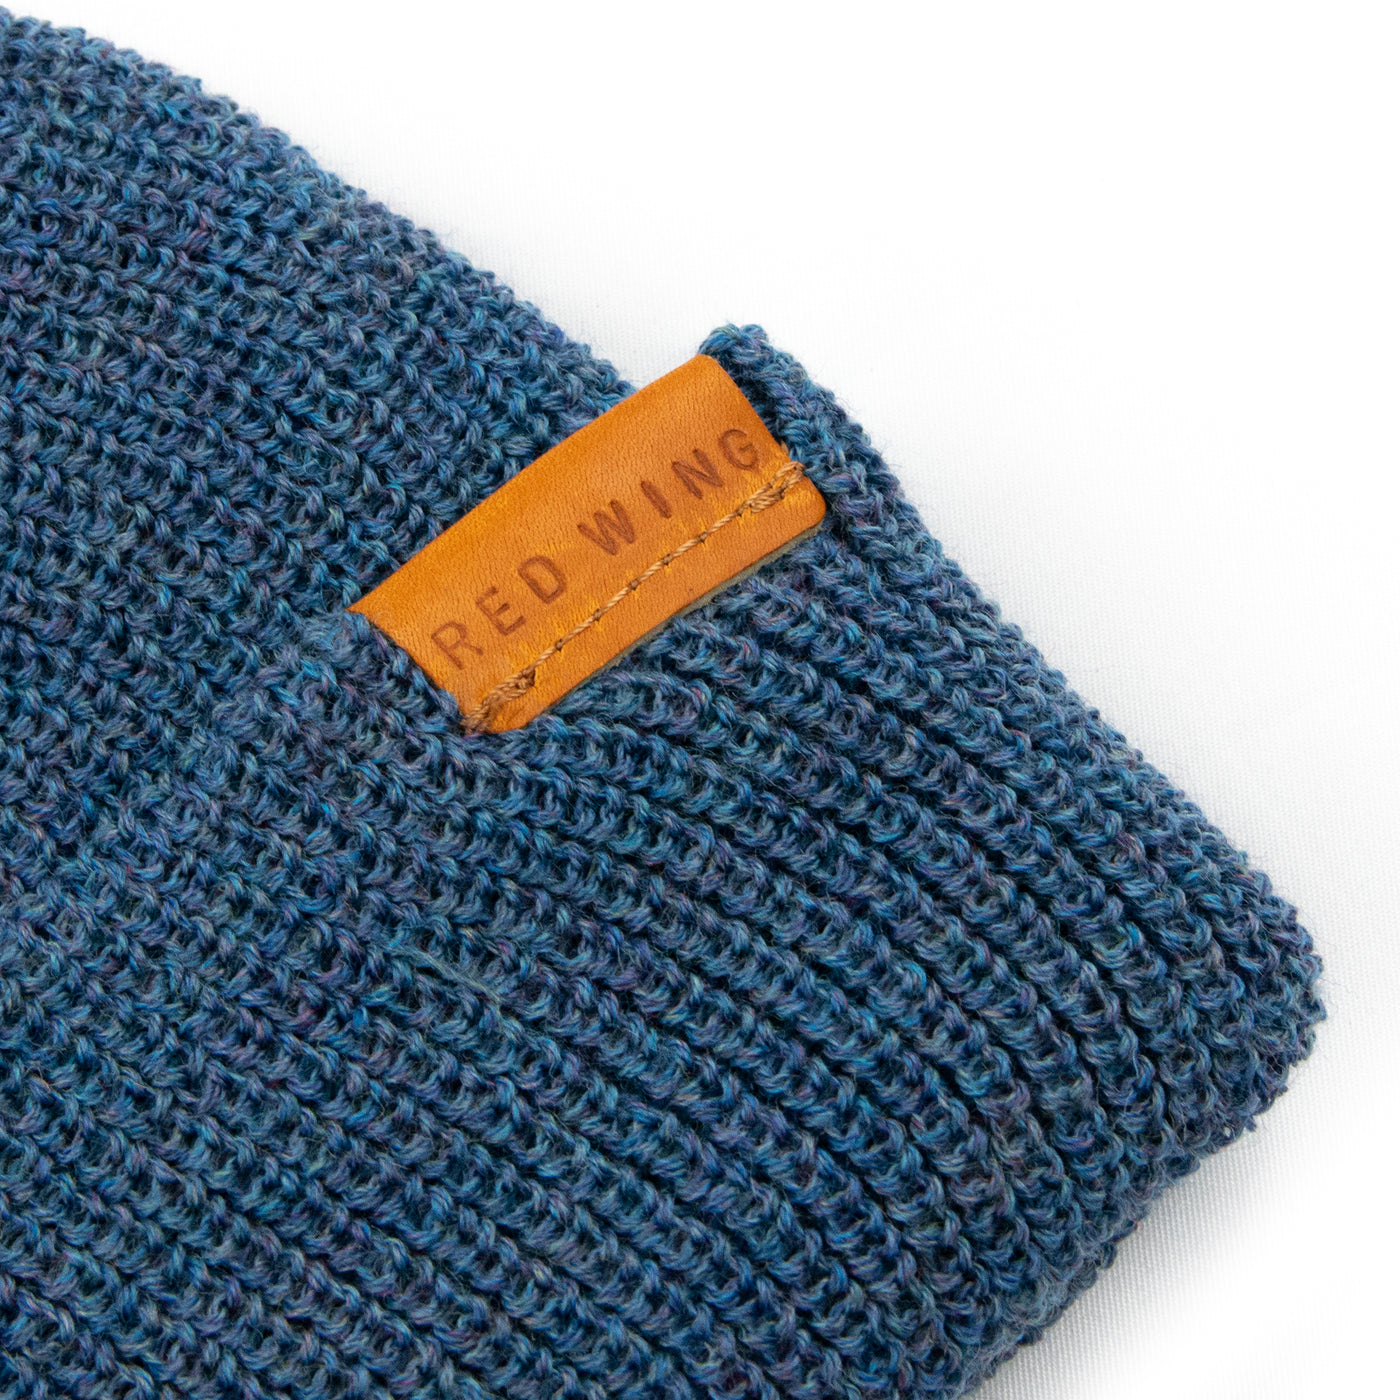  Red Wing Merino Wool Knit Beanie Blue Heather Made in USA LABEL